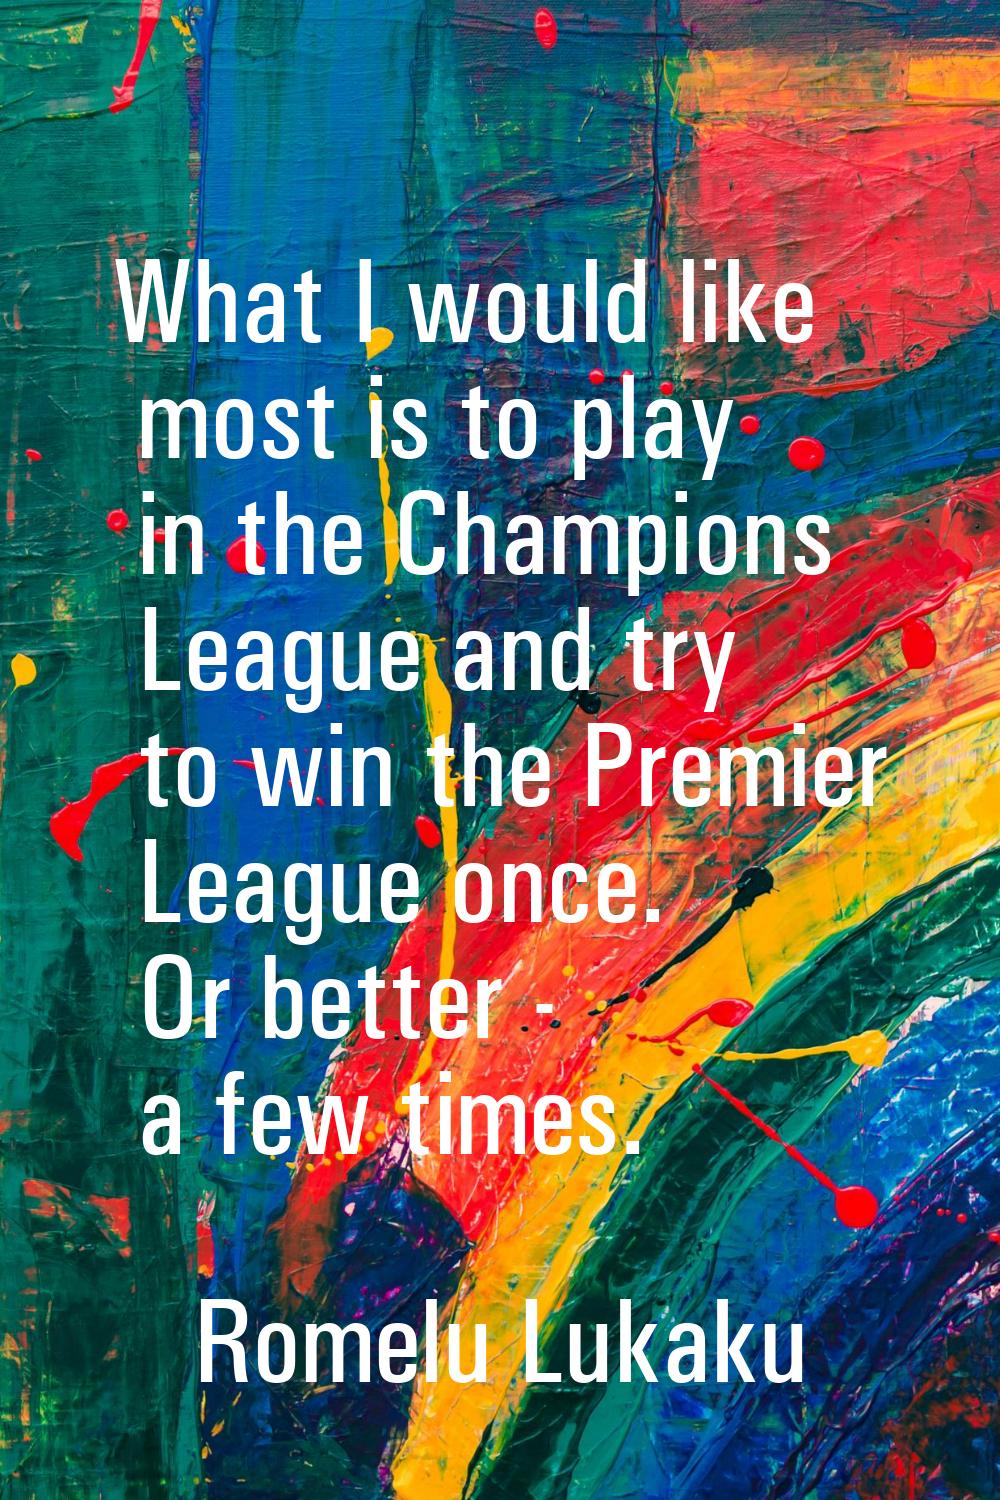 What I would like most is to play in the Champions League and try to win the Premier League once. O